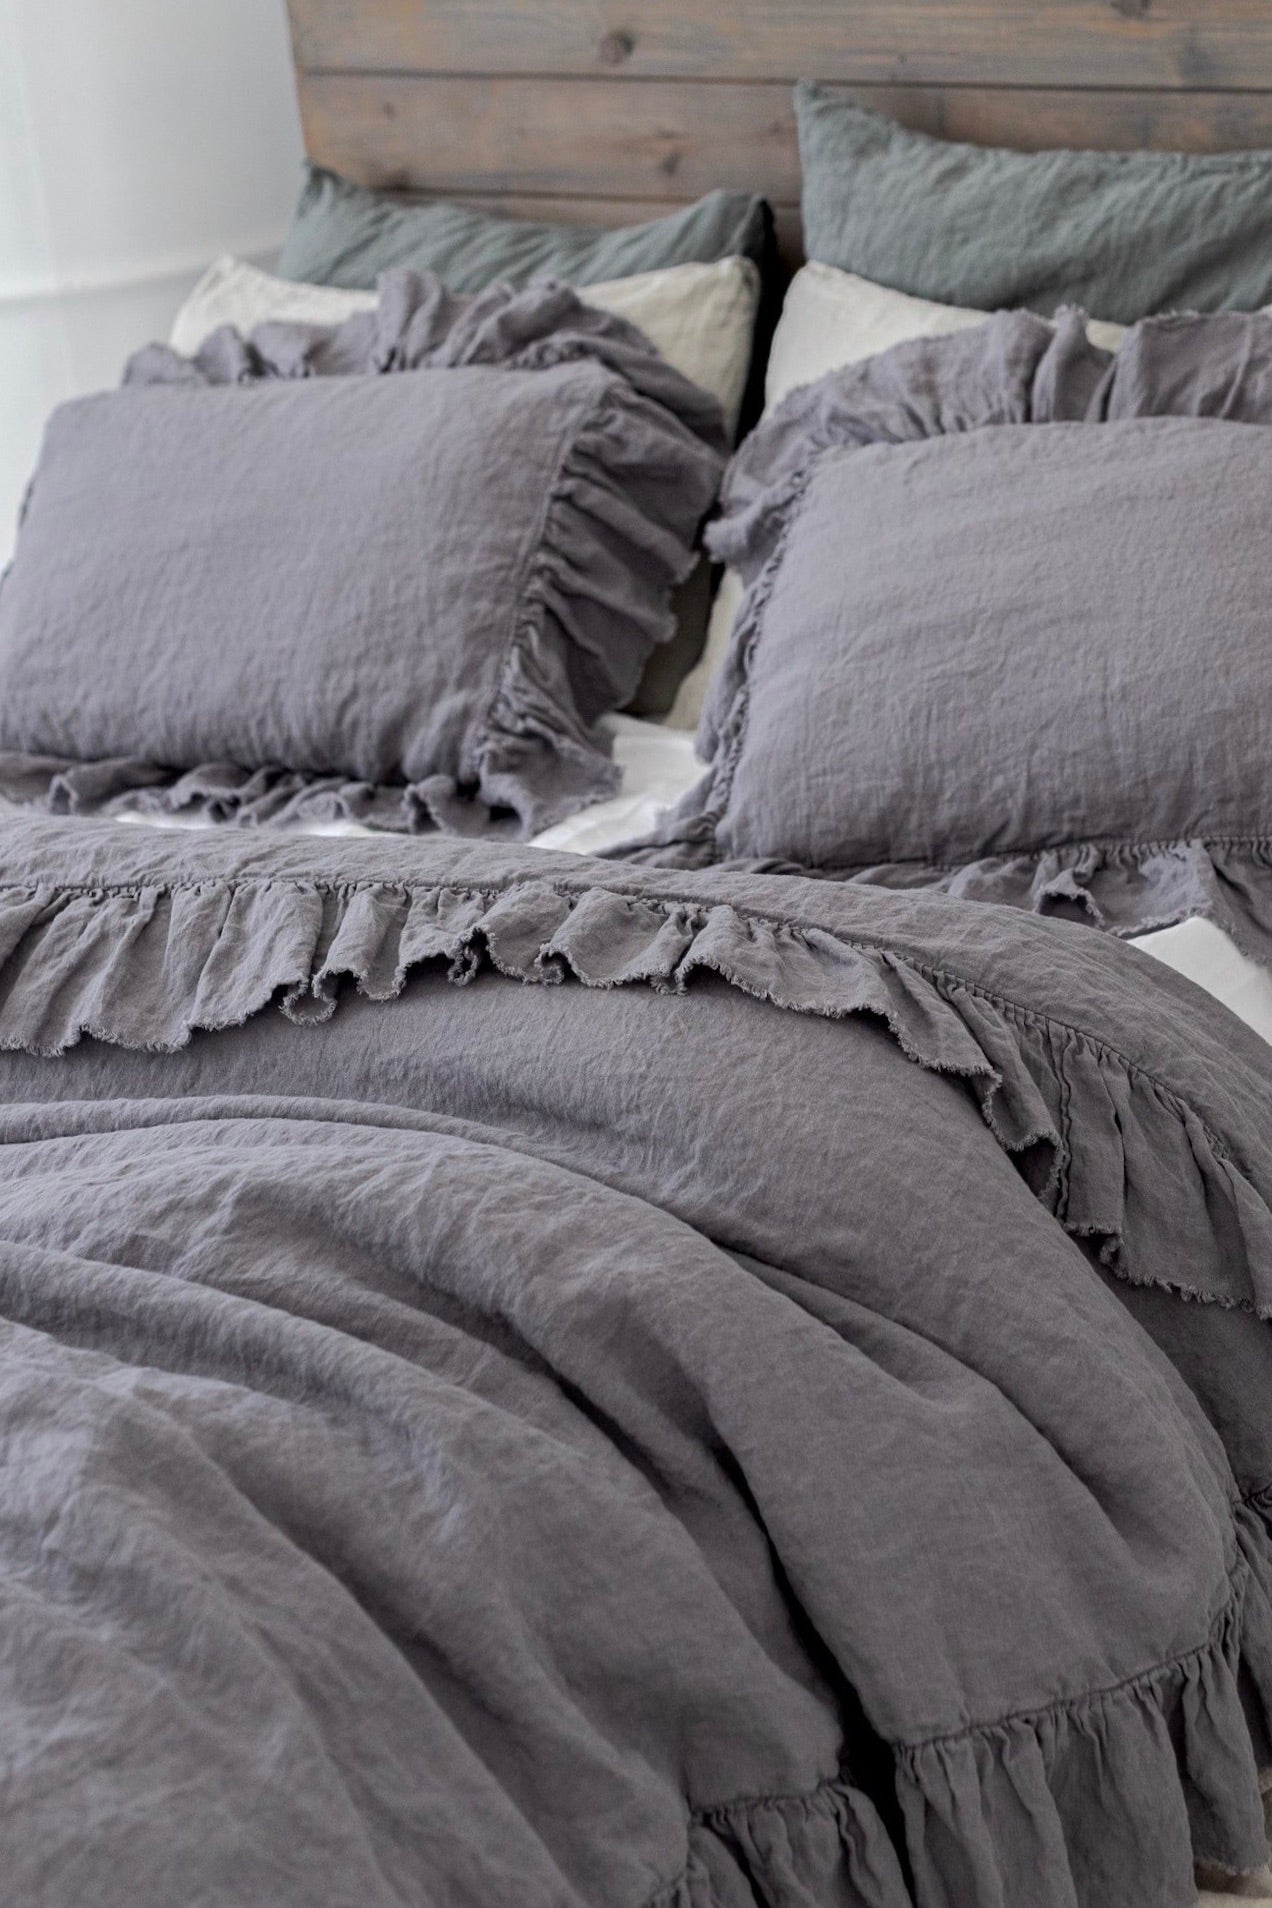 Purchase a Linen Duvet Cover With Frayed Edges